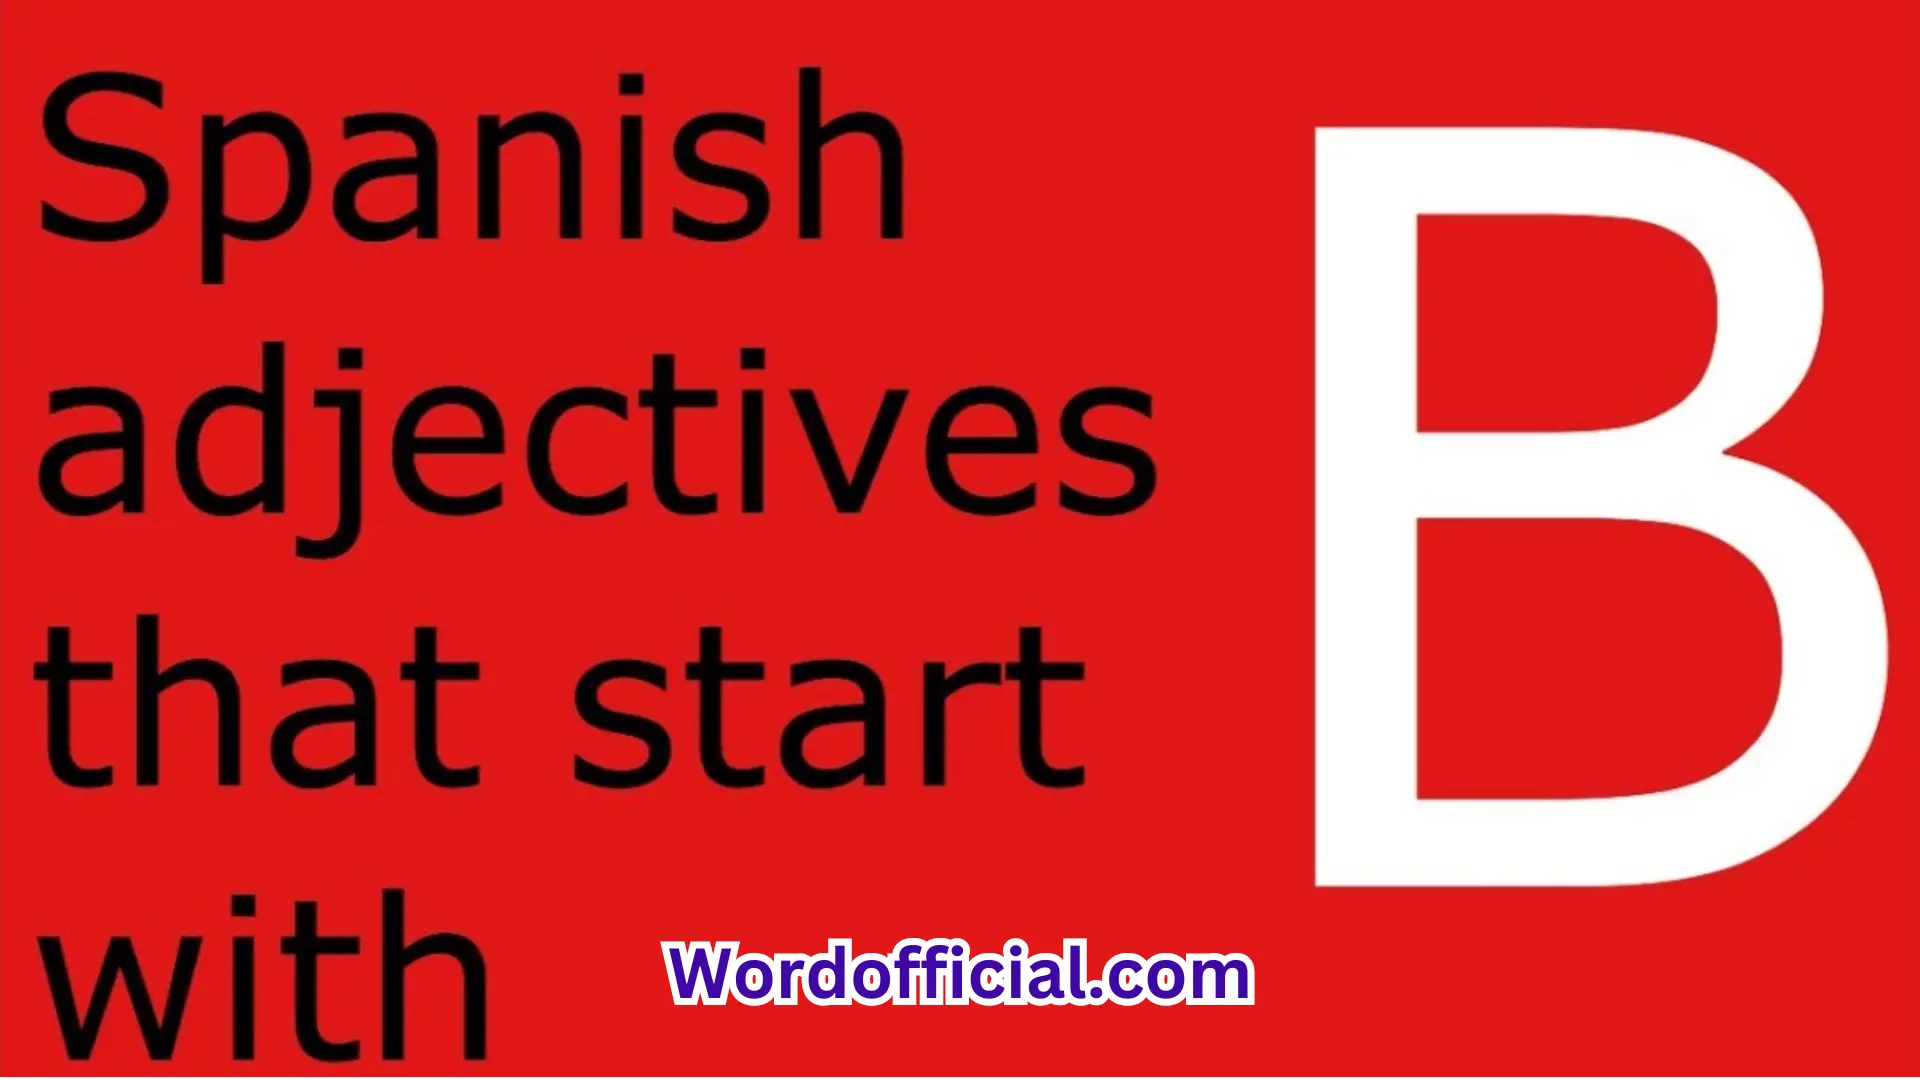 Adjectives That Start With B